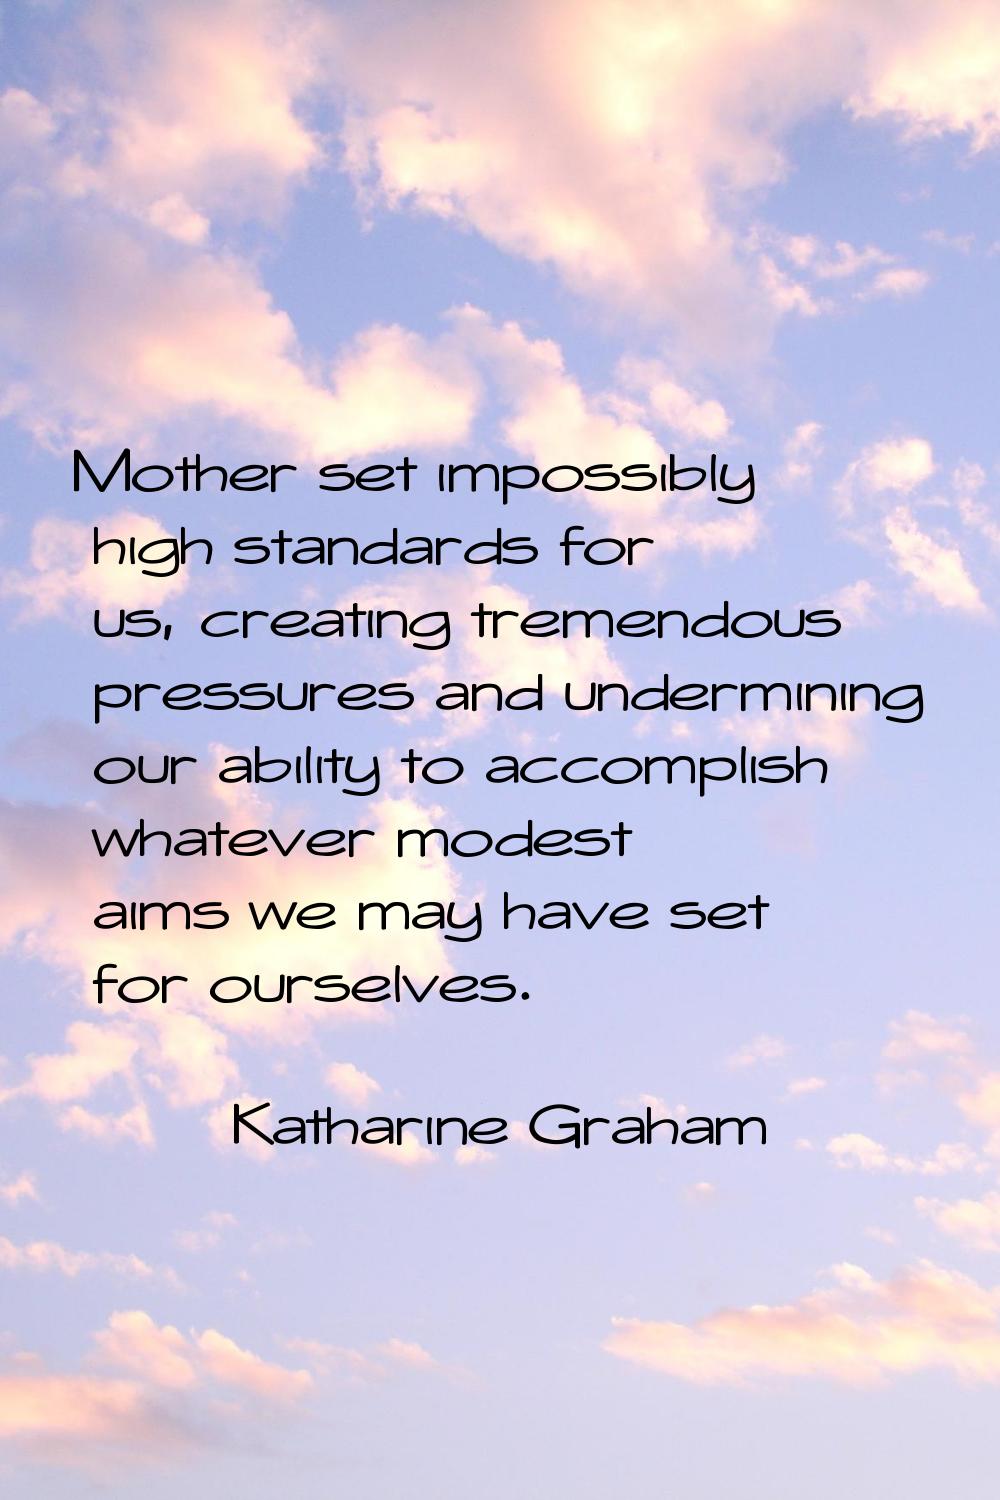 Mother set impossibly high standards for us, creating tremendous pressures and undermining our abil